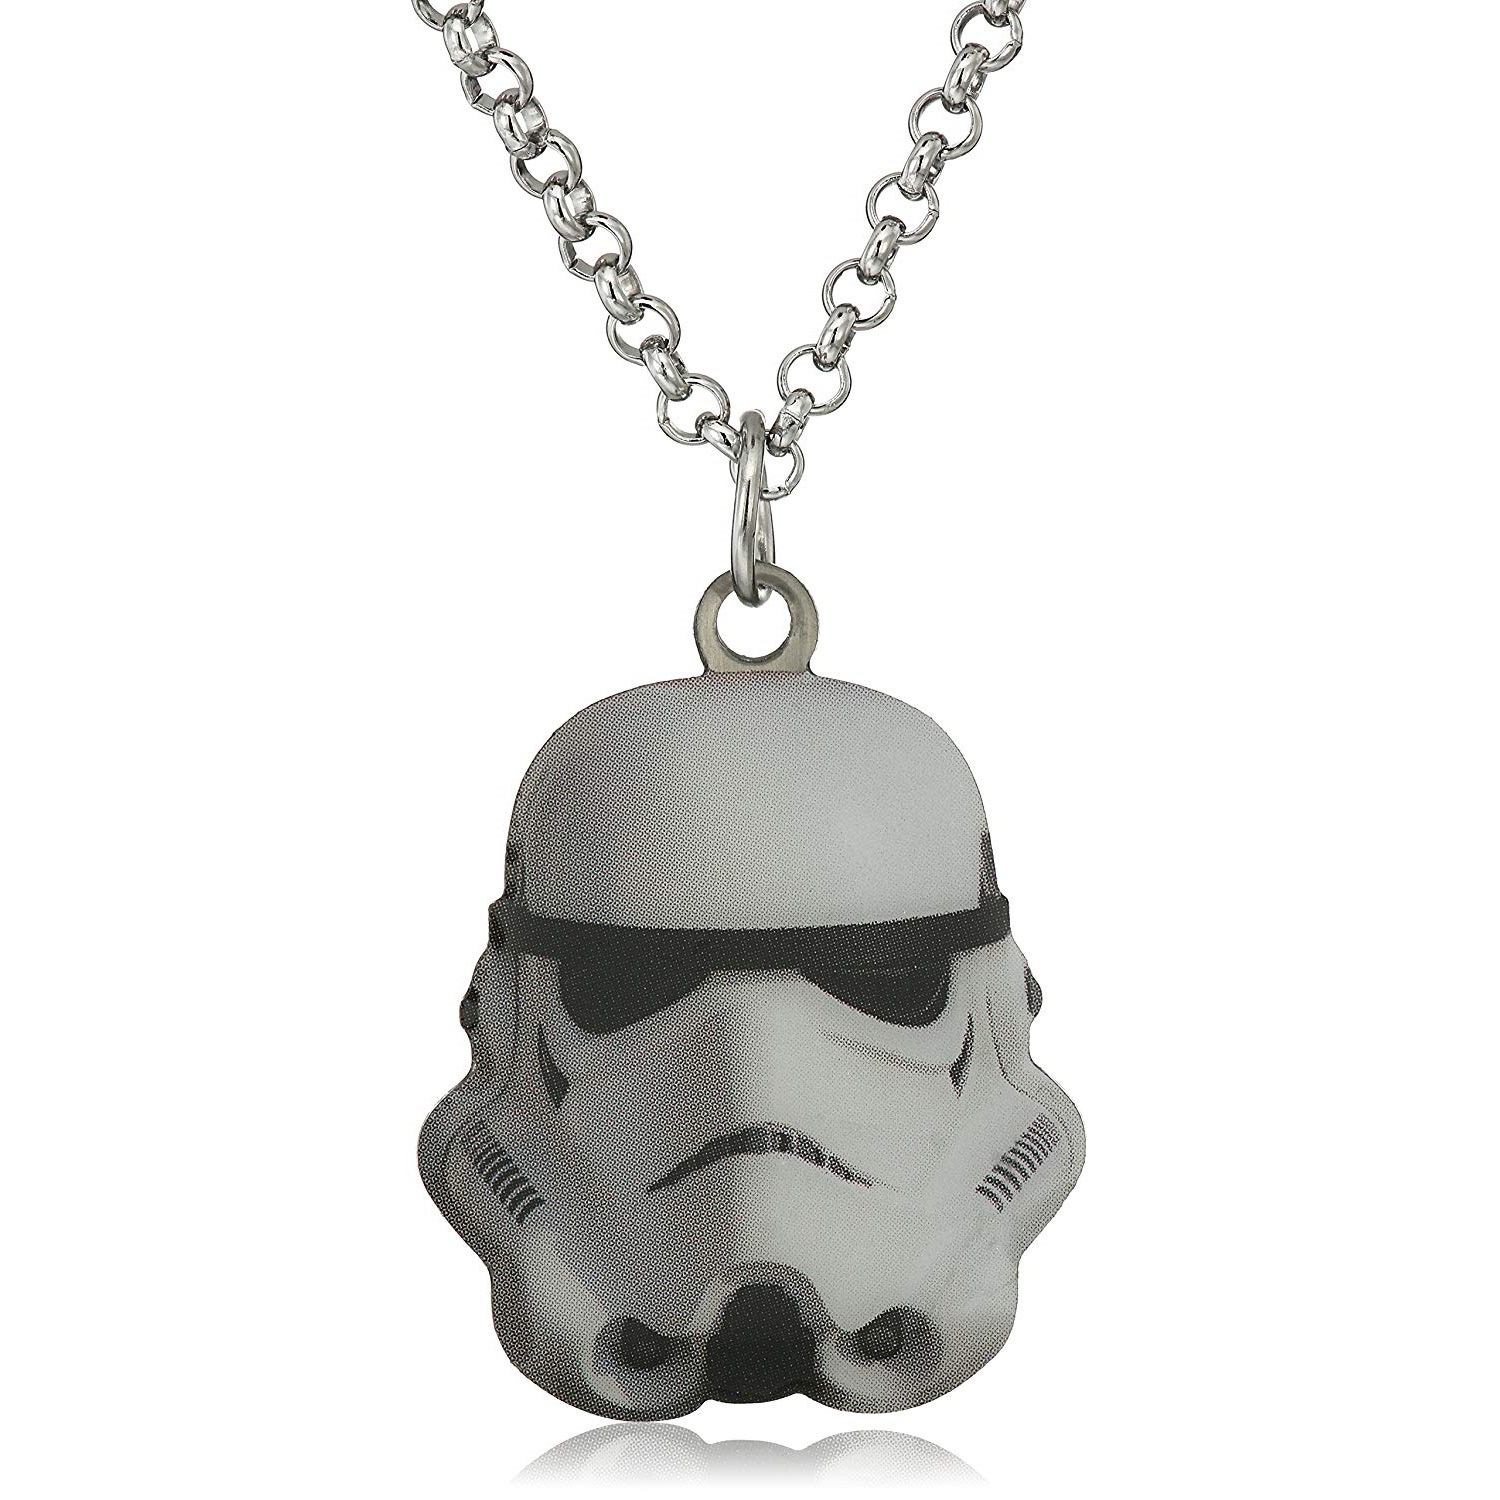 Body Vibe x Star Wars Stormtrooper Cut Out Pendant Necklace on Amazon